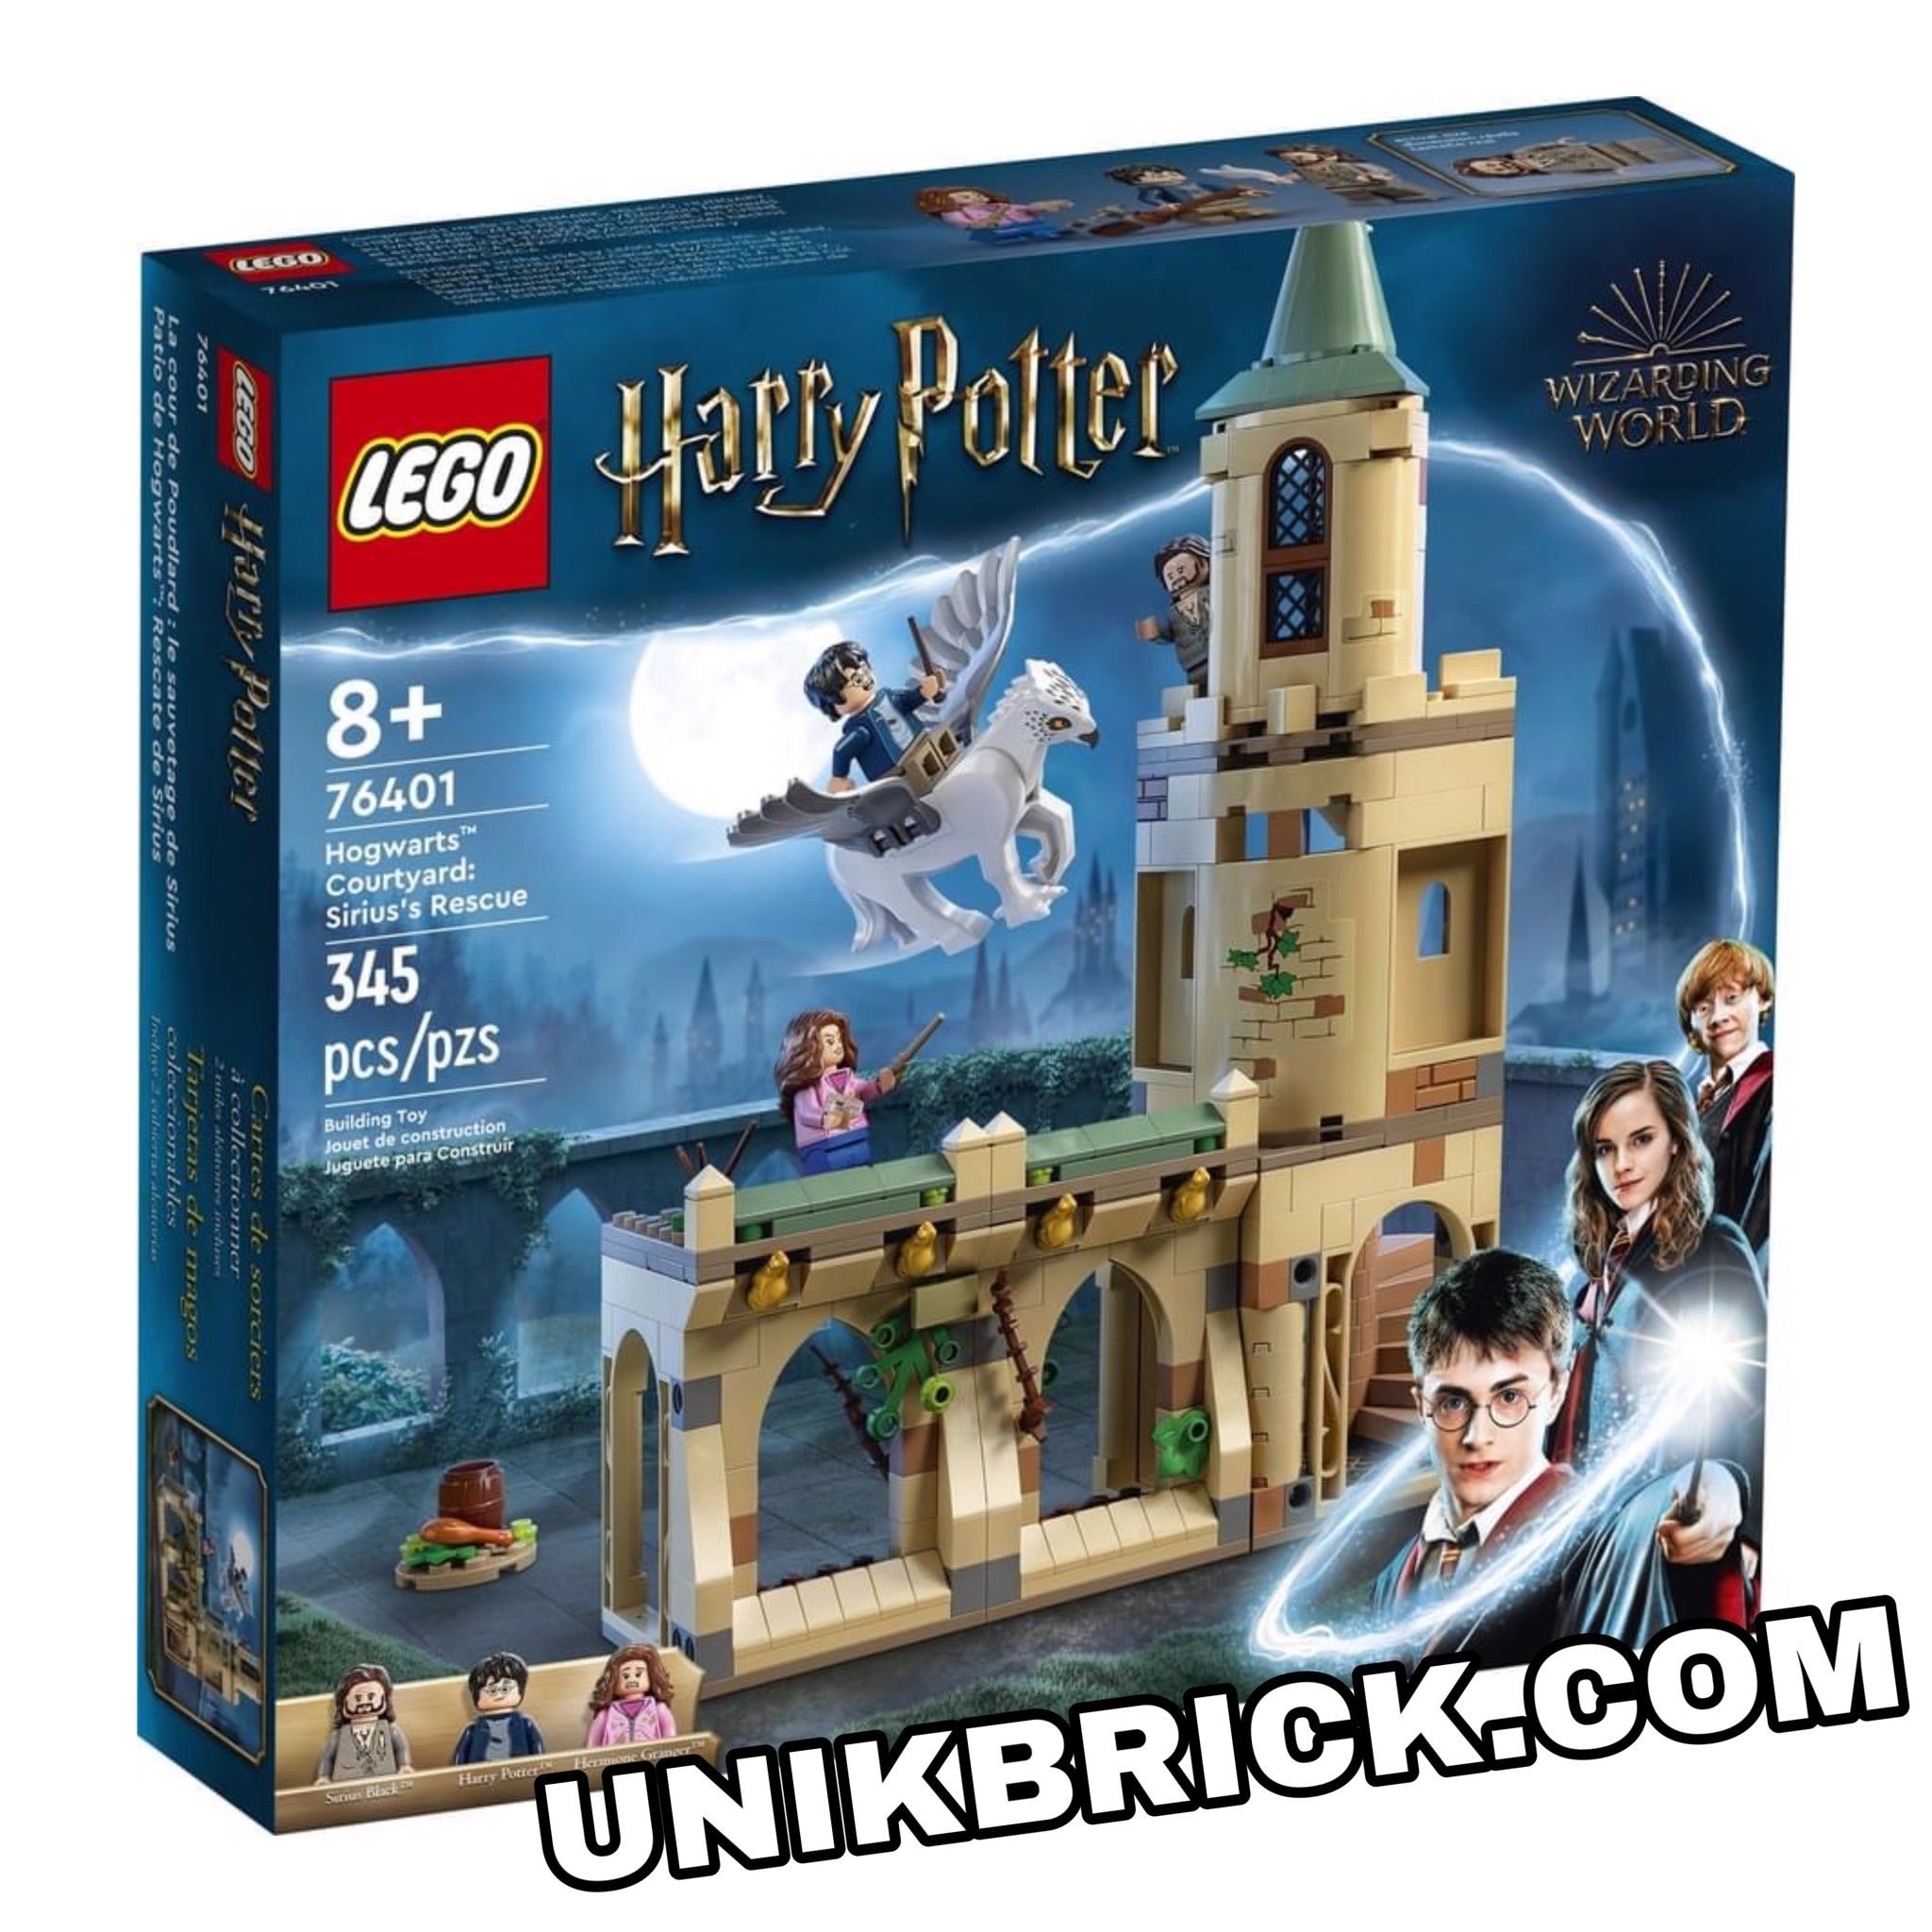 [HÀNG ĐẶT/ ORDER] LEGO Harry Potter 76401 Hogwarts Courtyard: Sirius’s Rescue